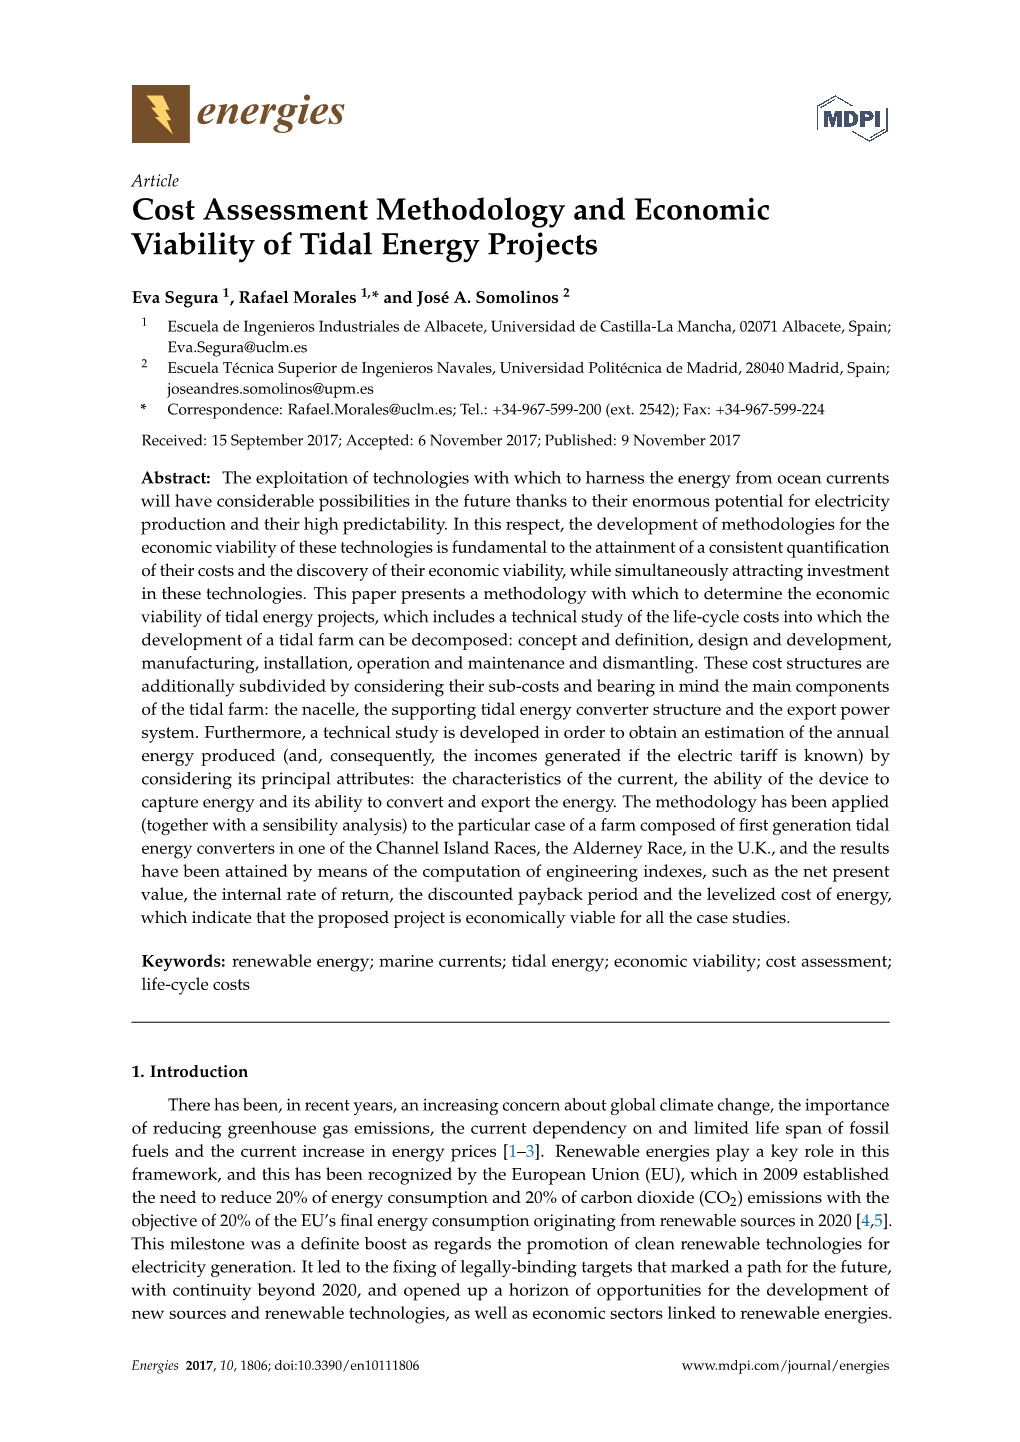 Cost Assessment Methodology and Economic Viability of Tidal Energy Projects